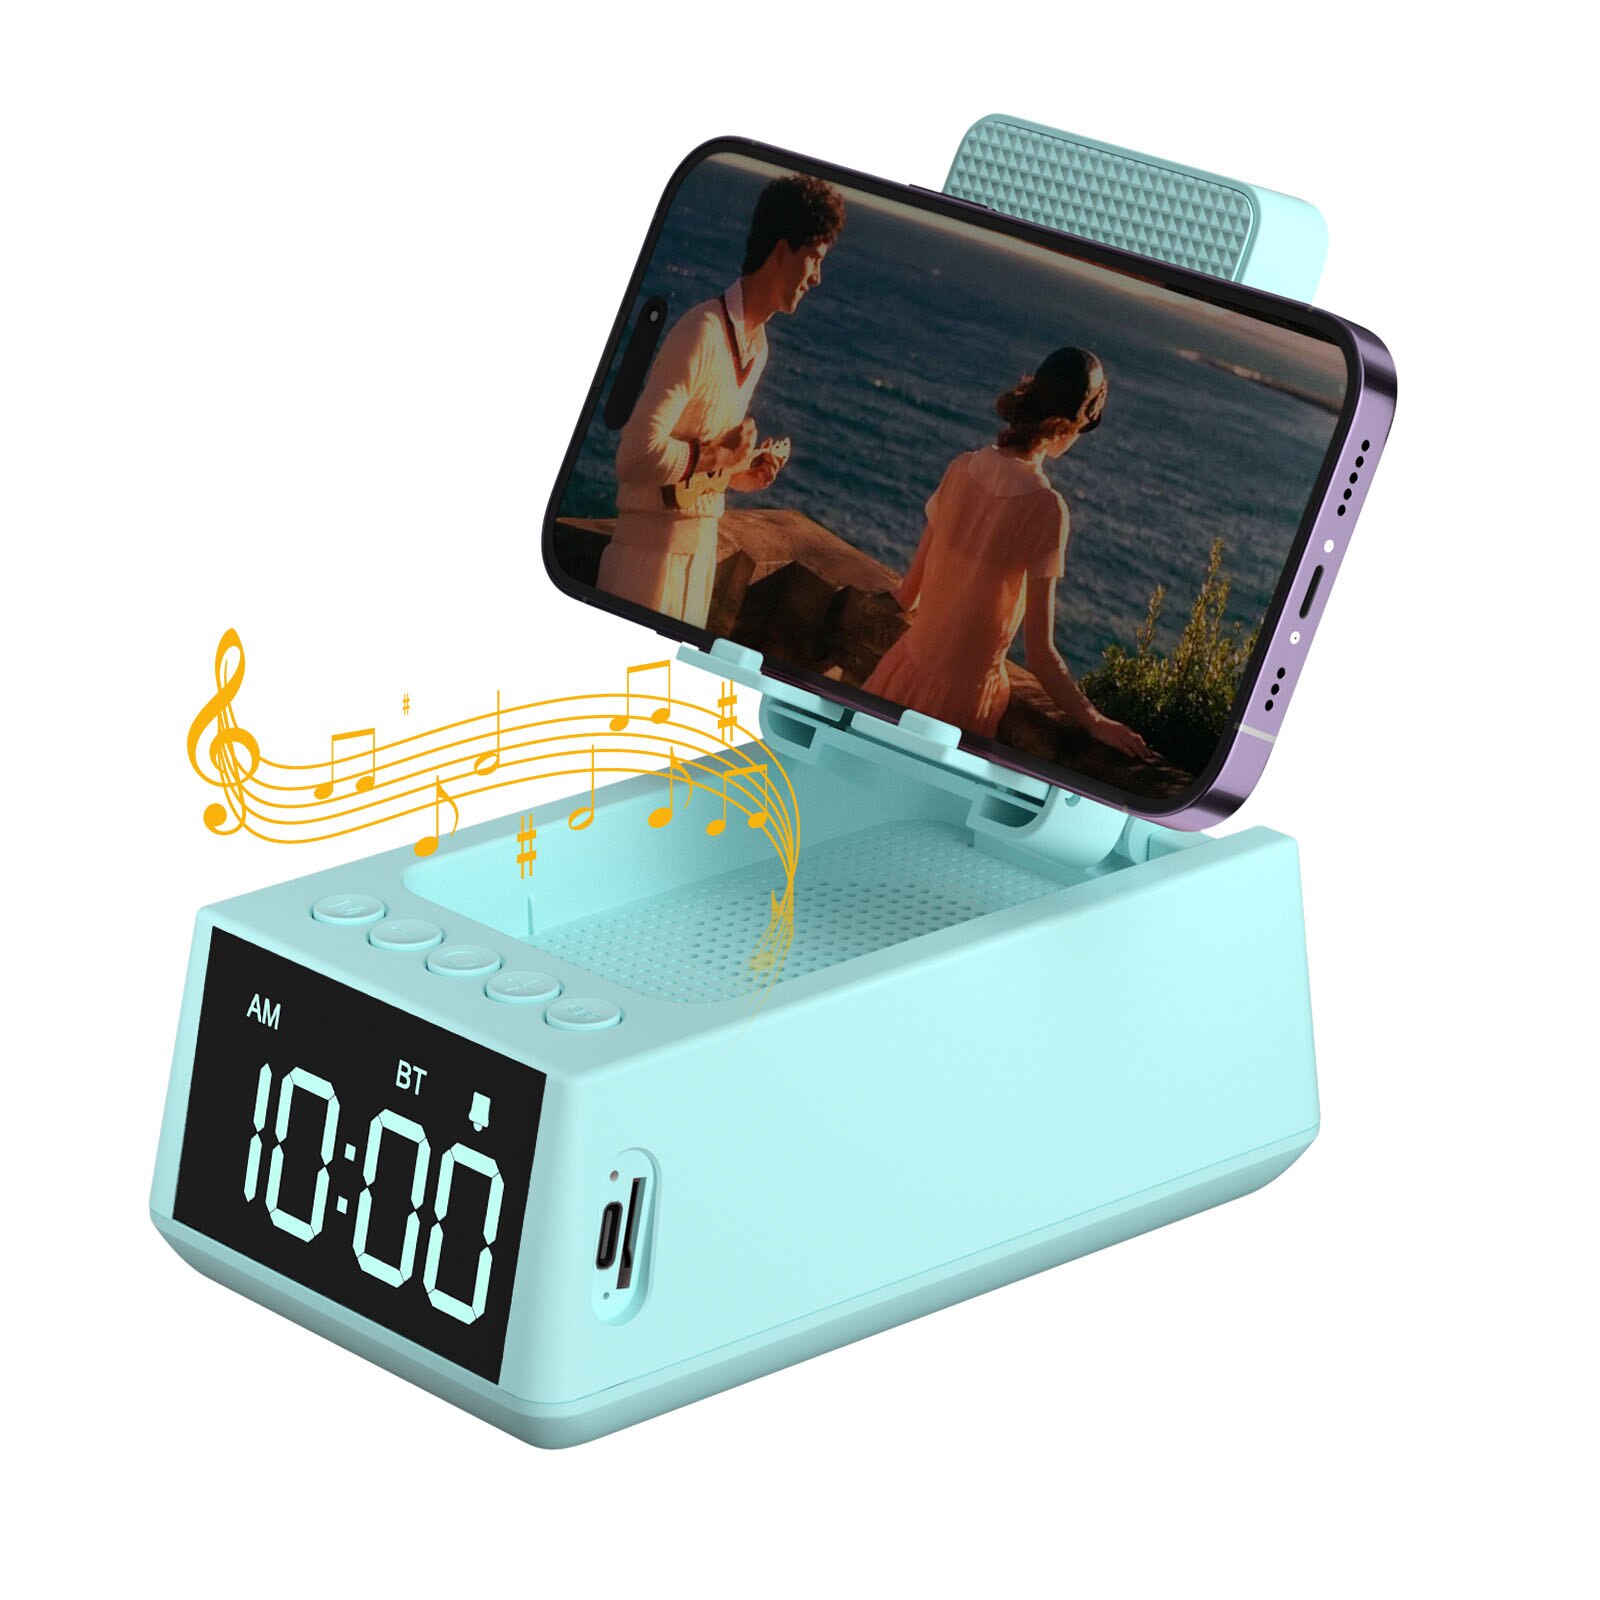 WISE TIGER Stand Bluetooth Speaker Foldable Wireless Speaker with Loud Alarm Clock Best Gift Sound Box with 12H Display for Home